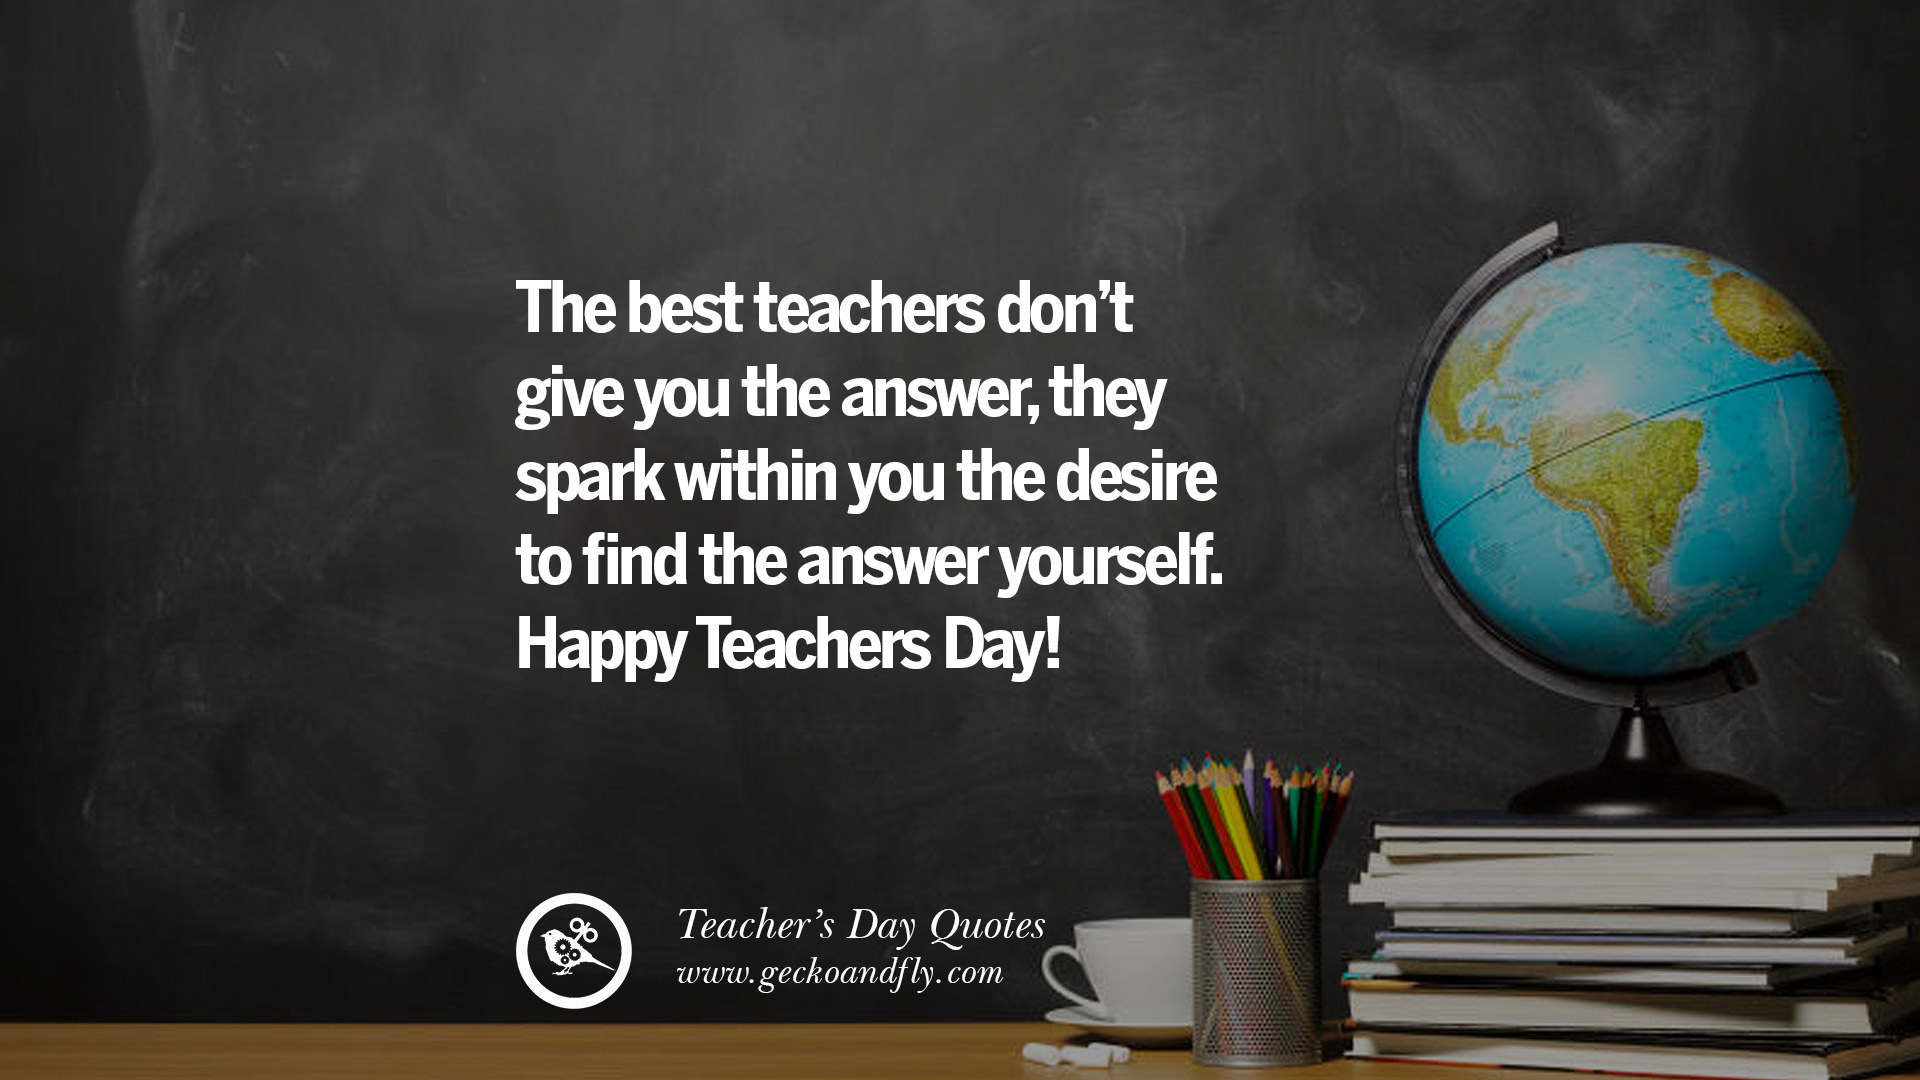 Teachers Day Quotes - Homecare24